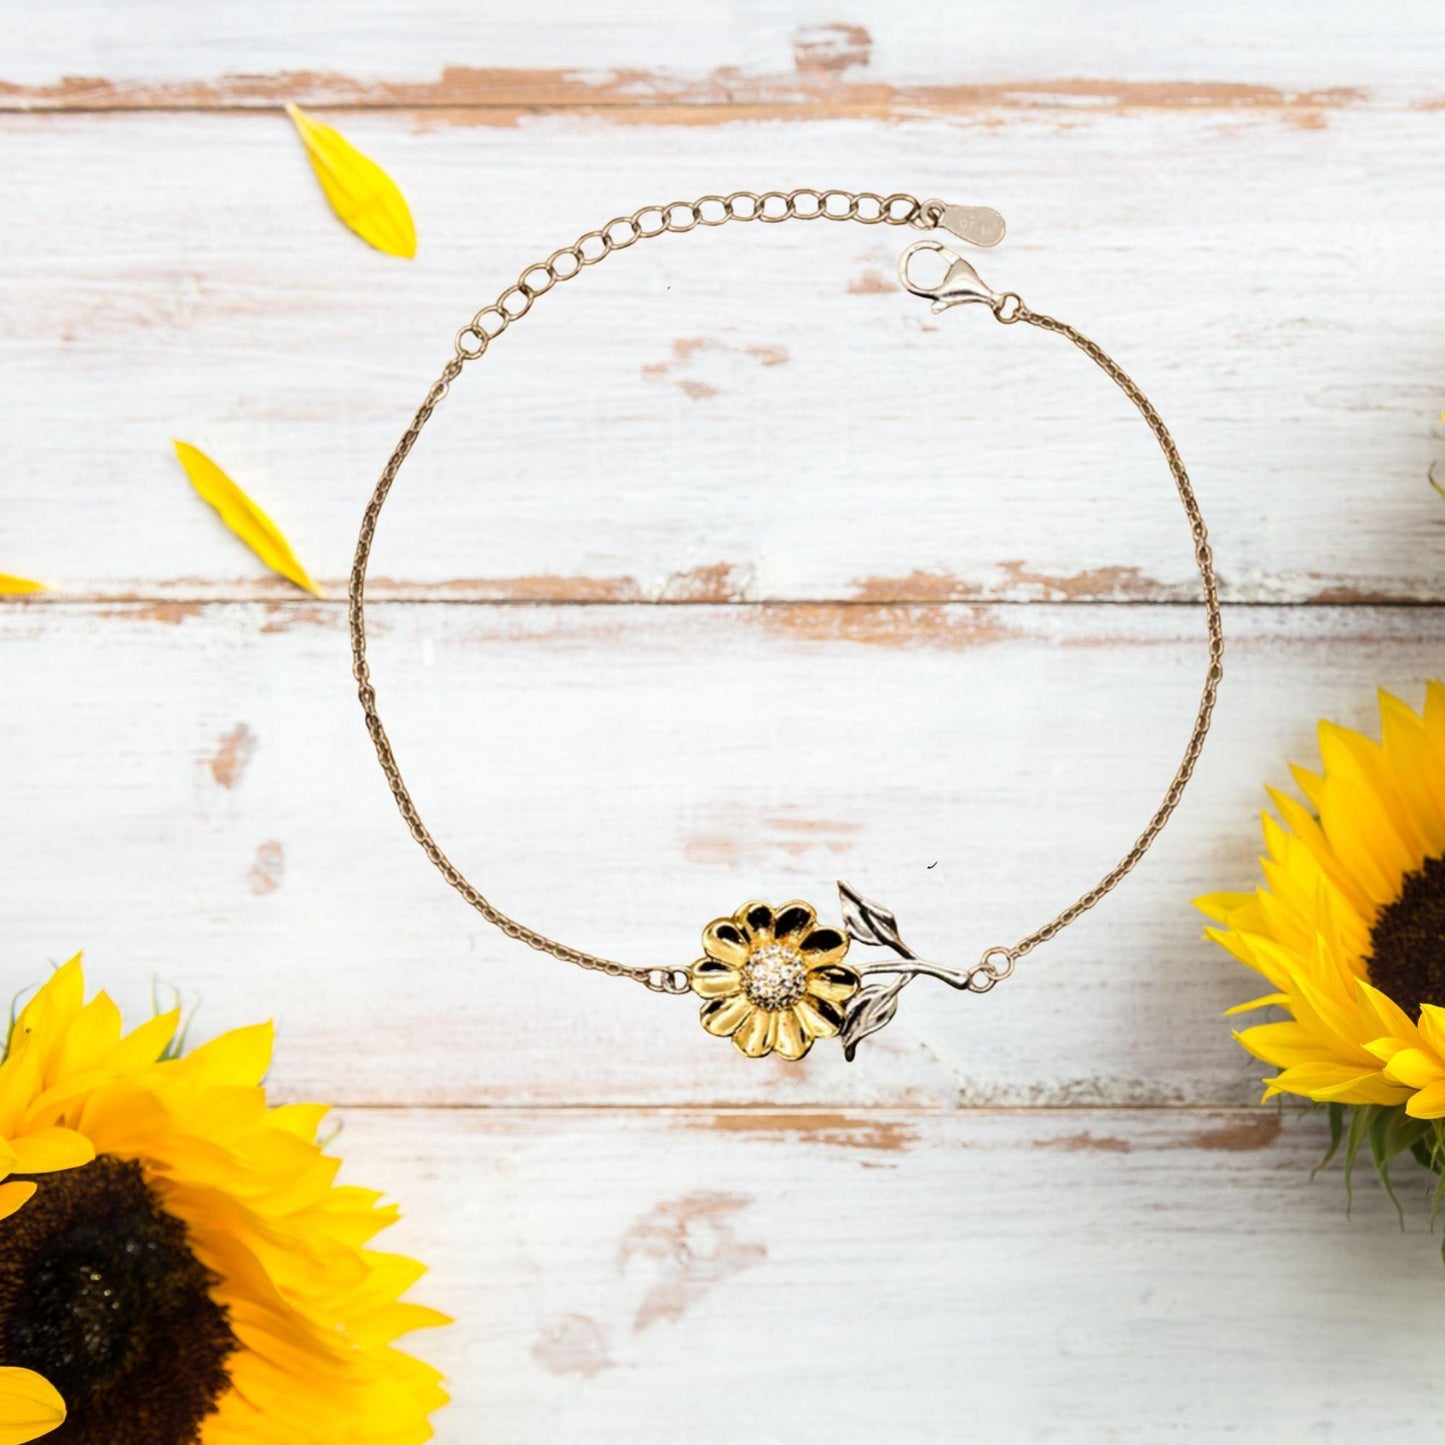 Remarkable Database Administrator Gifts, Your dedication and hard work, Inspirational Birthday Christmas Unique Sunflower Bracelet For Database Administrator, Coworkers, Men, Women, Friends - Mallard Moon Gift Shop